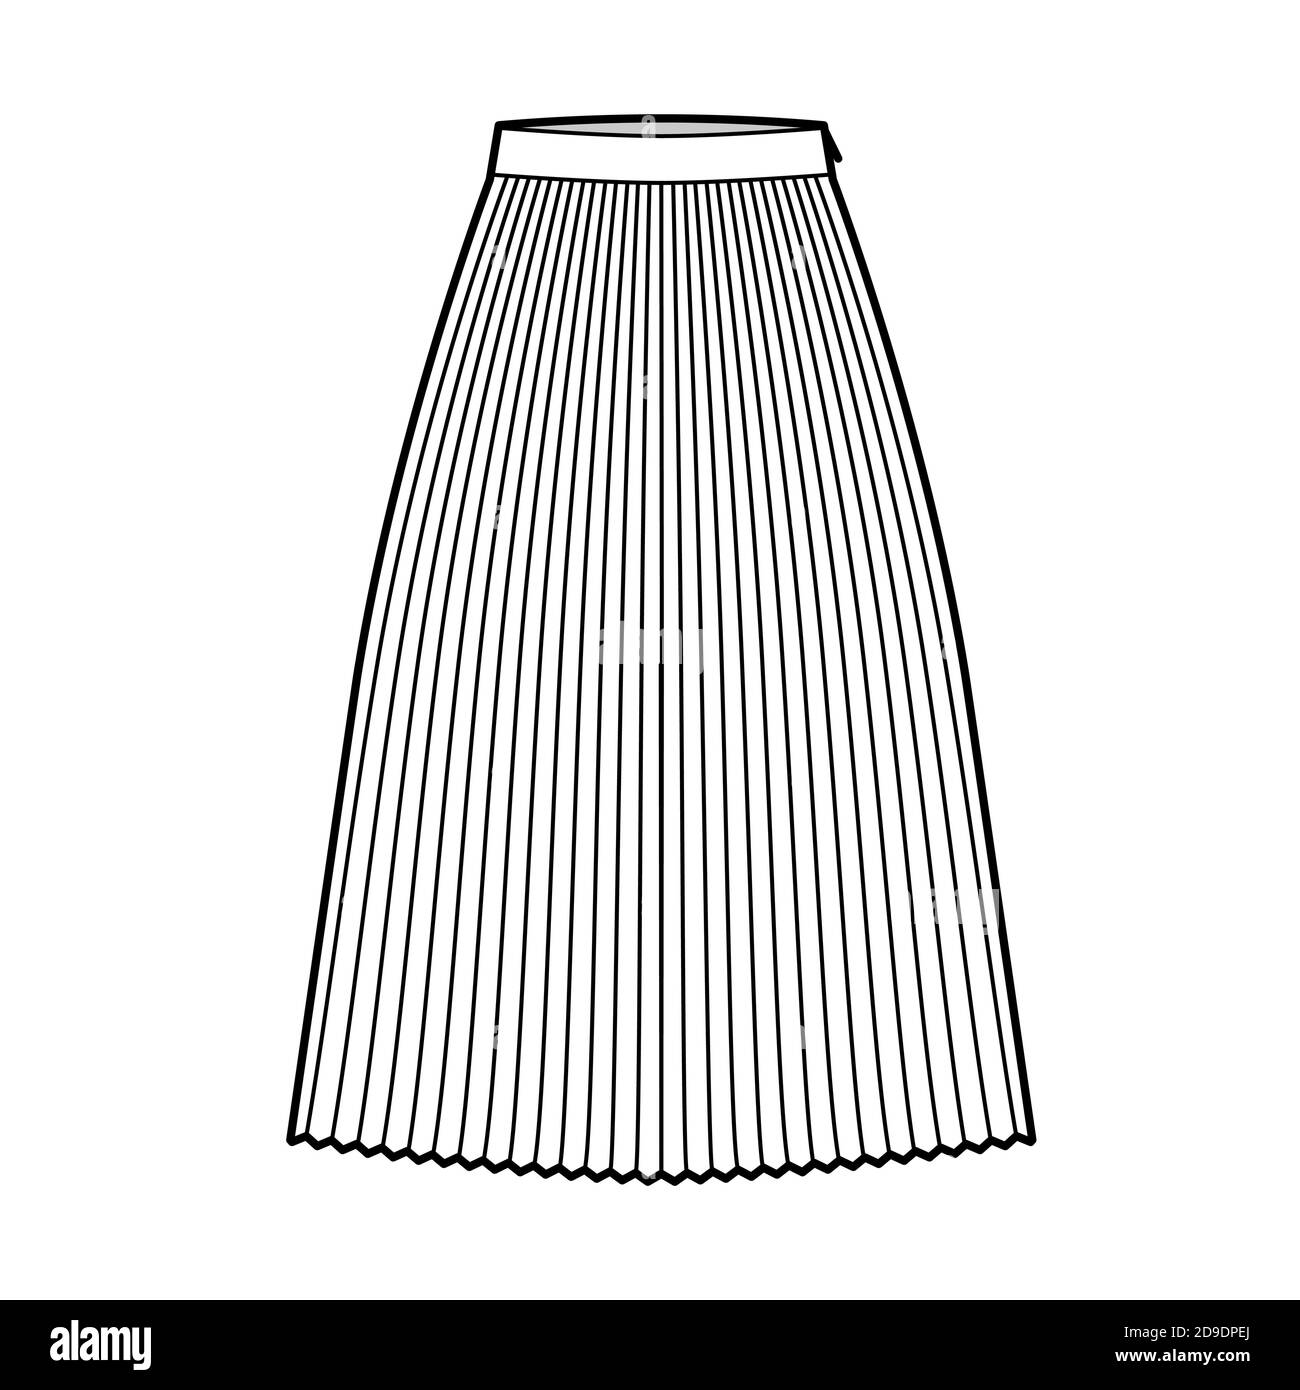 Skirt sunray pleat technical fashion illustration with below-the-knee ...